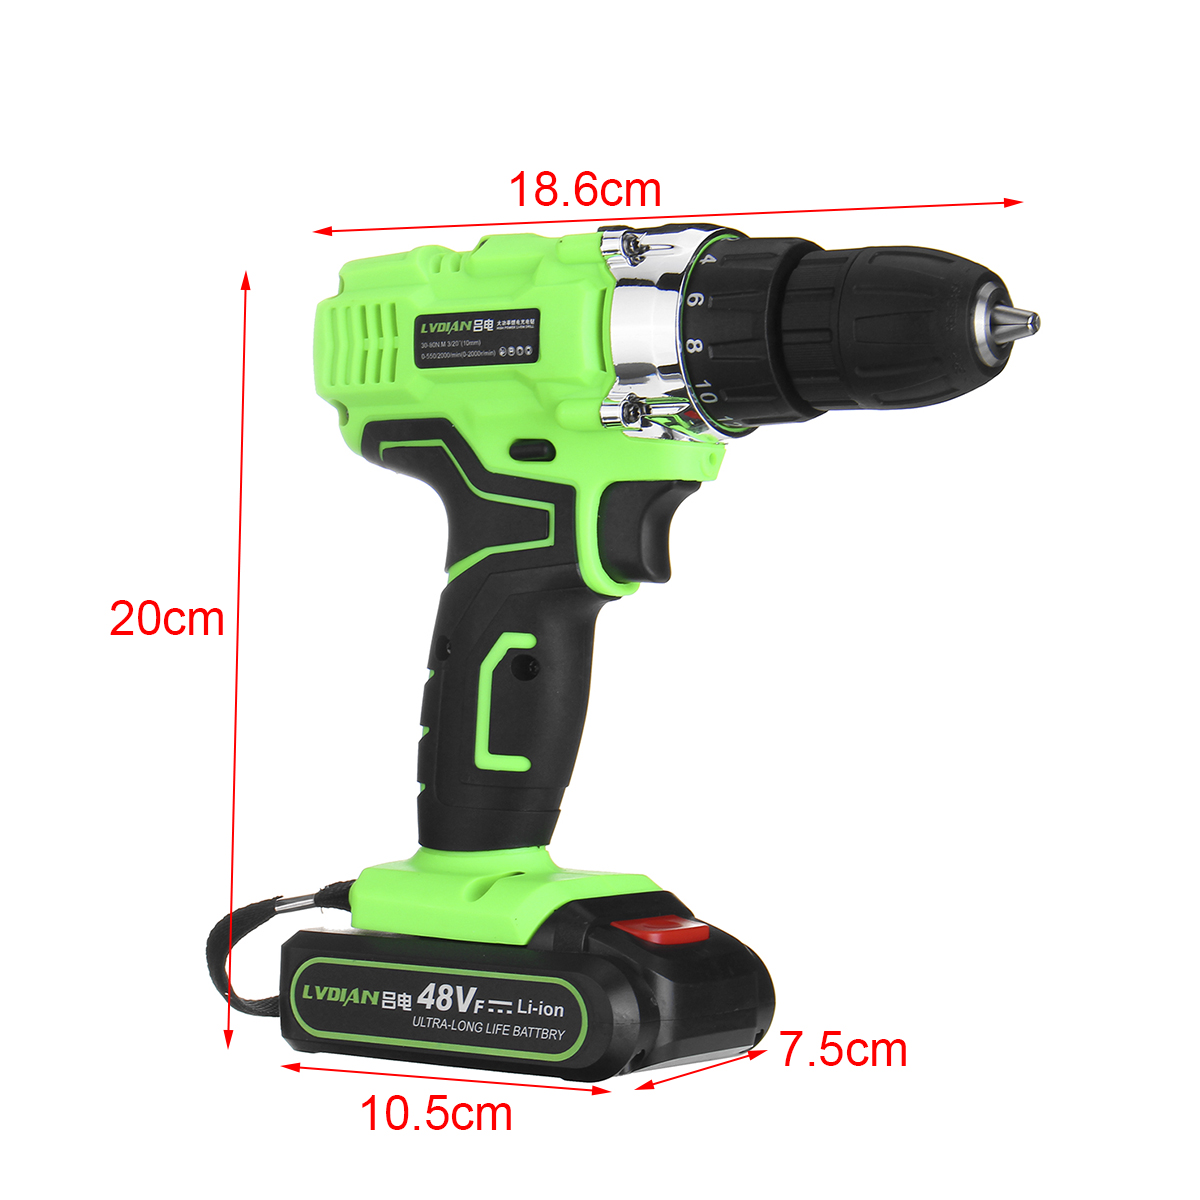 48V-2-Speed-Cordless-Electric-Screwdriver-Drill-LED-Rechargeable-Waterproof-Electric-Power-Dirver-Dr-1599546-6